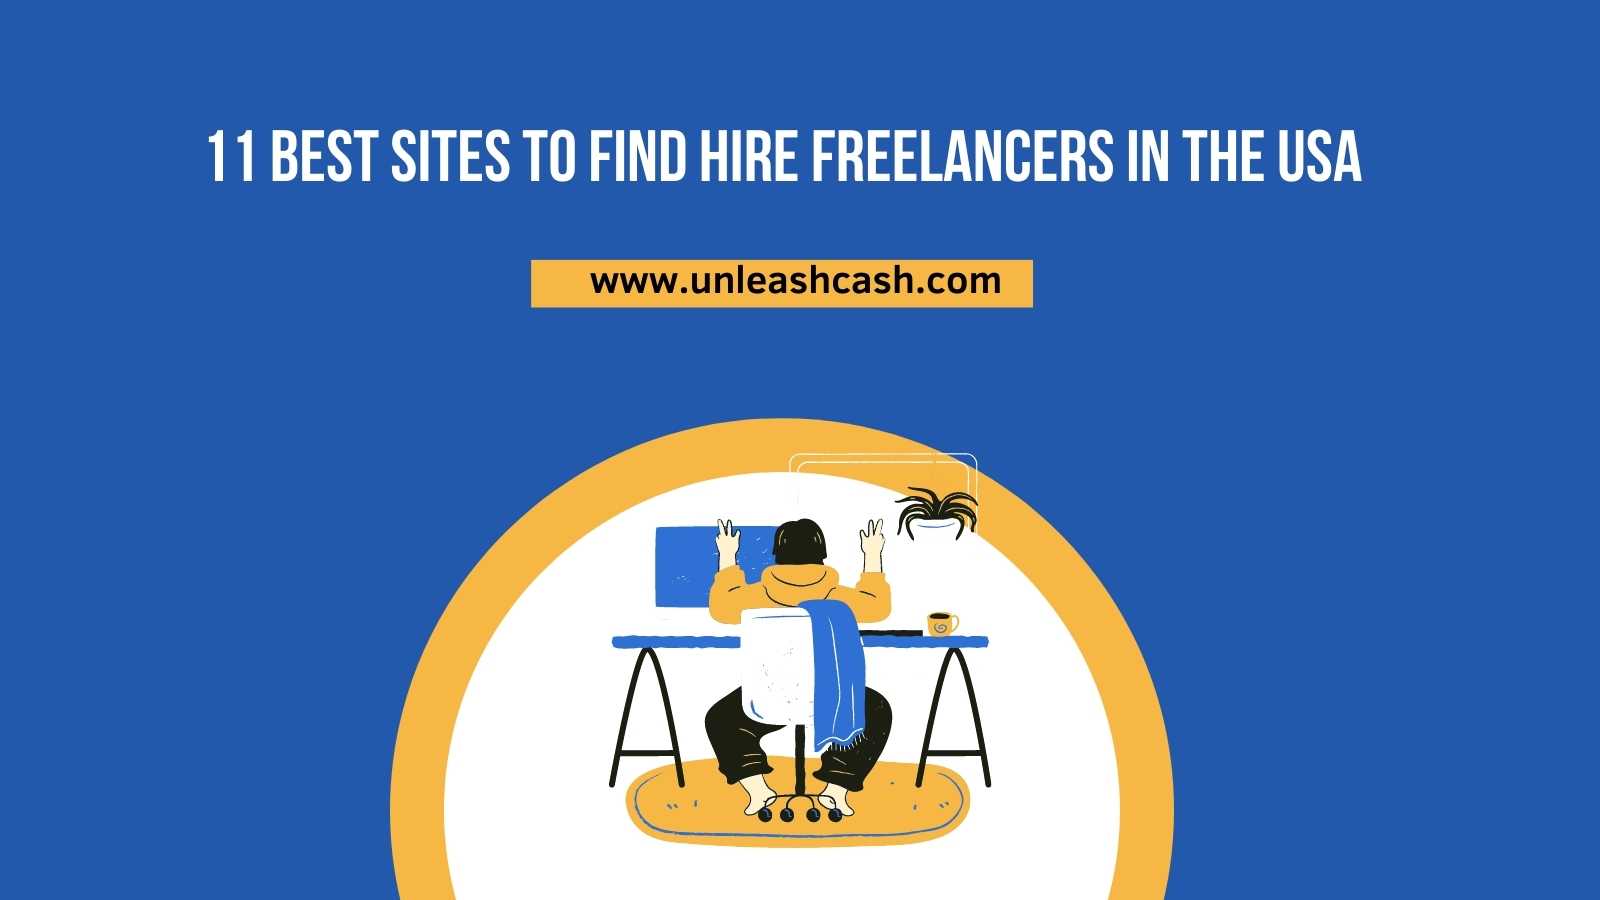 11 Best Sites To Find Hire Freelancers In The USA